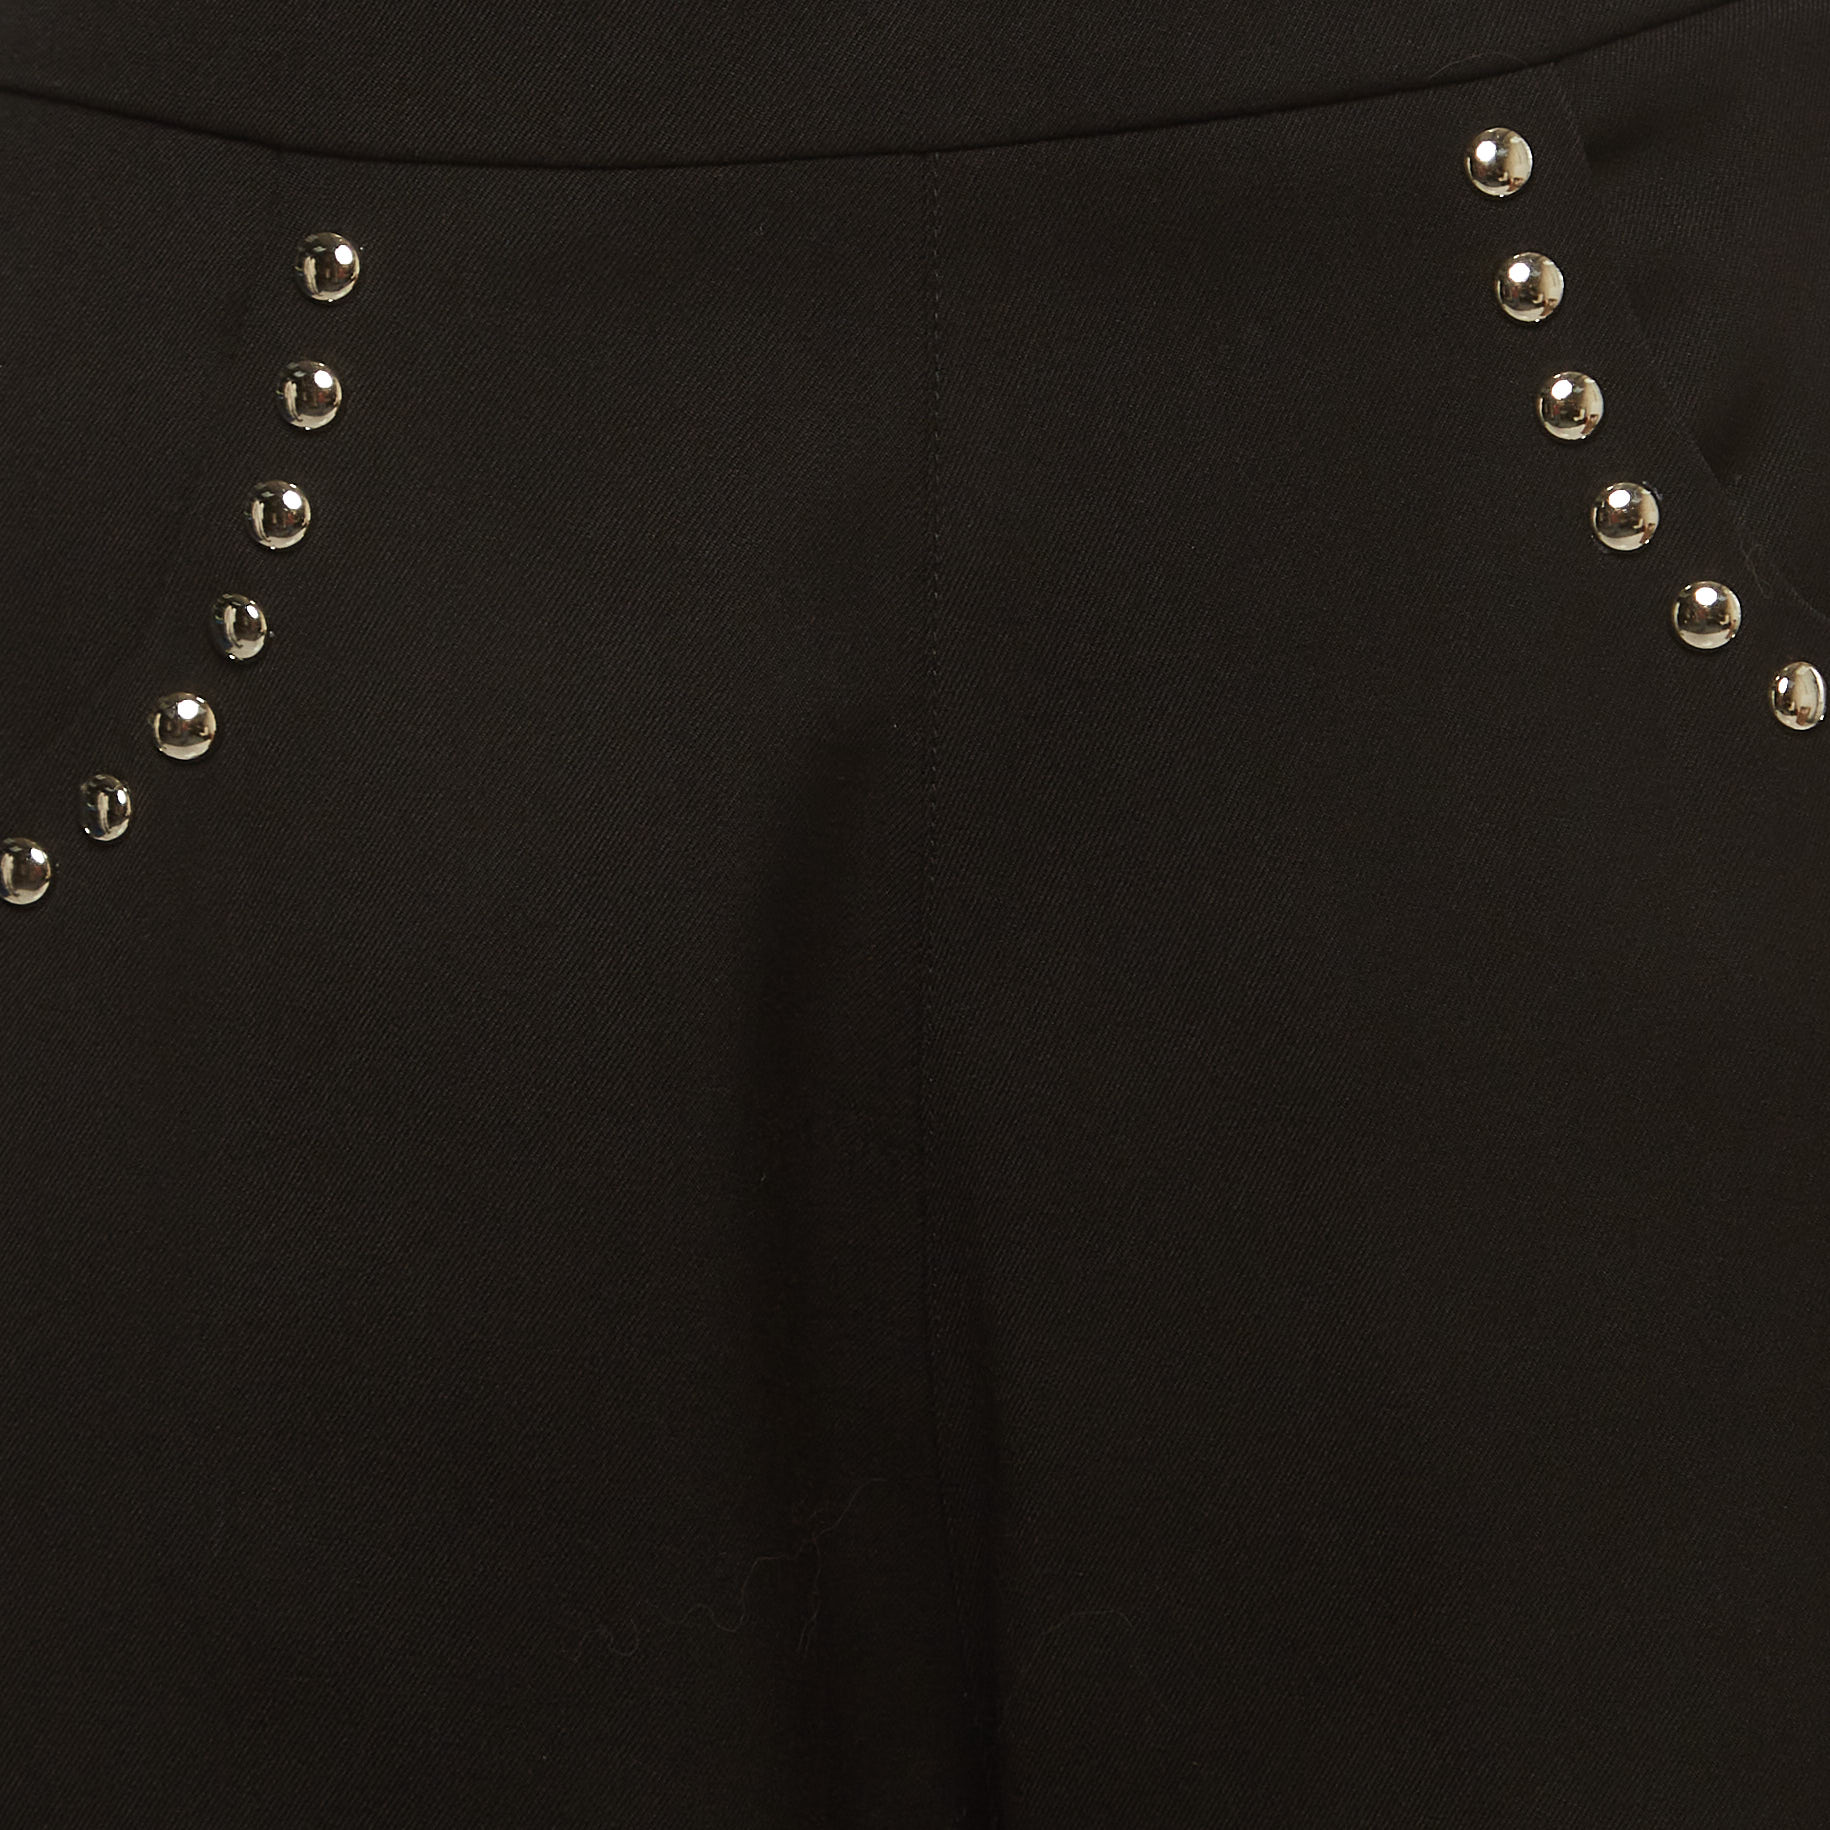 Love Moschino Black Knit Metal Studded Trousers M